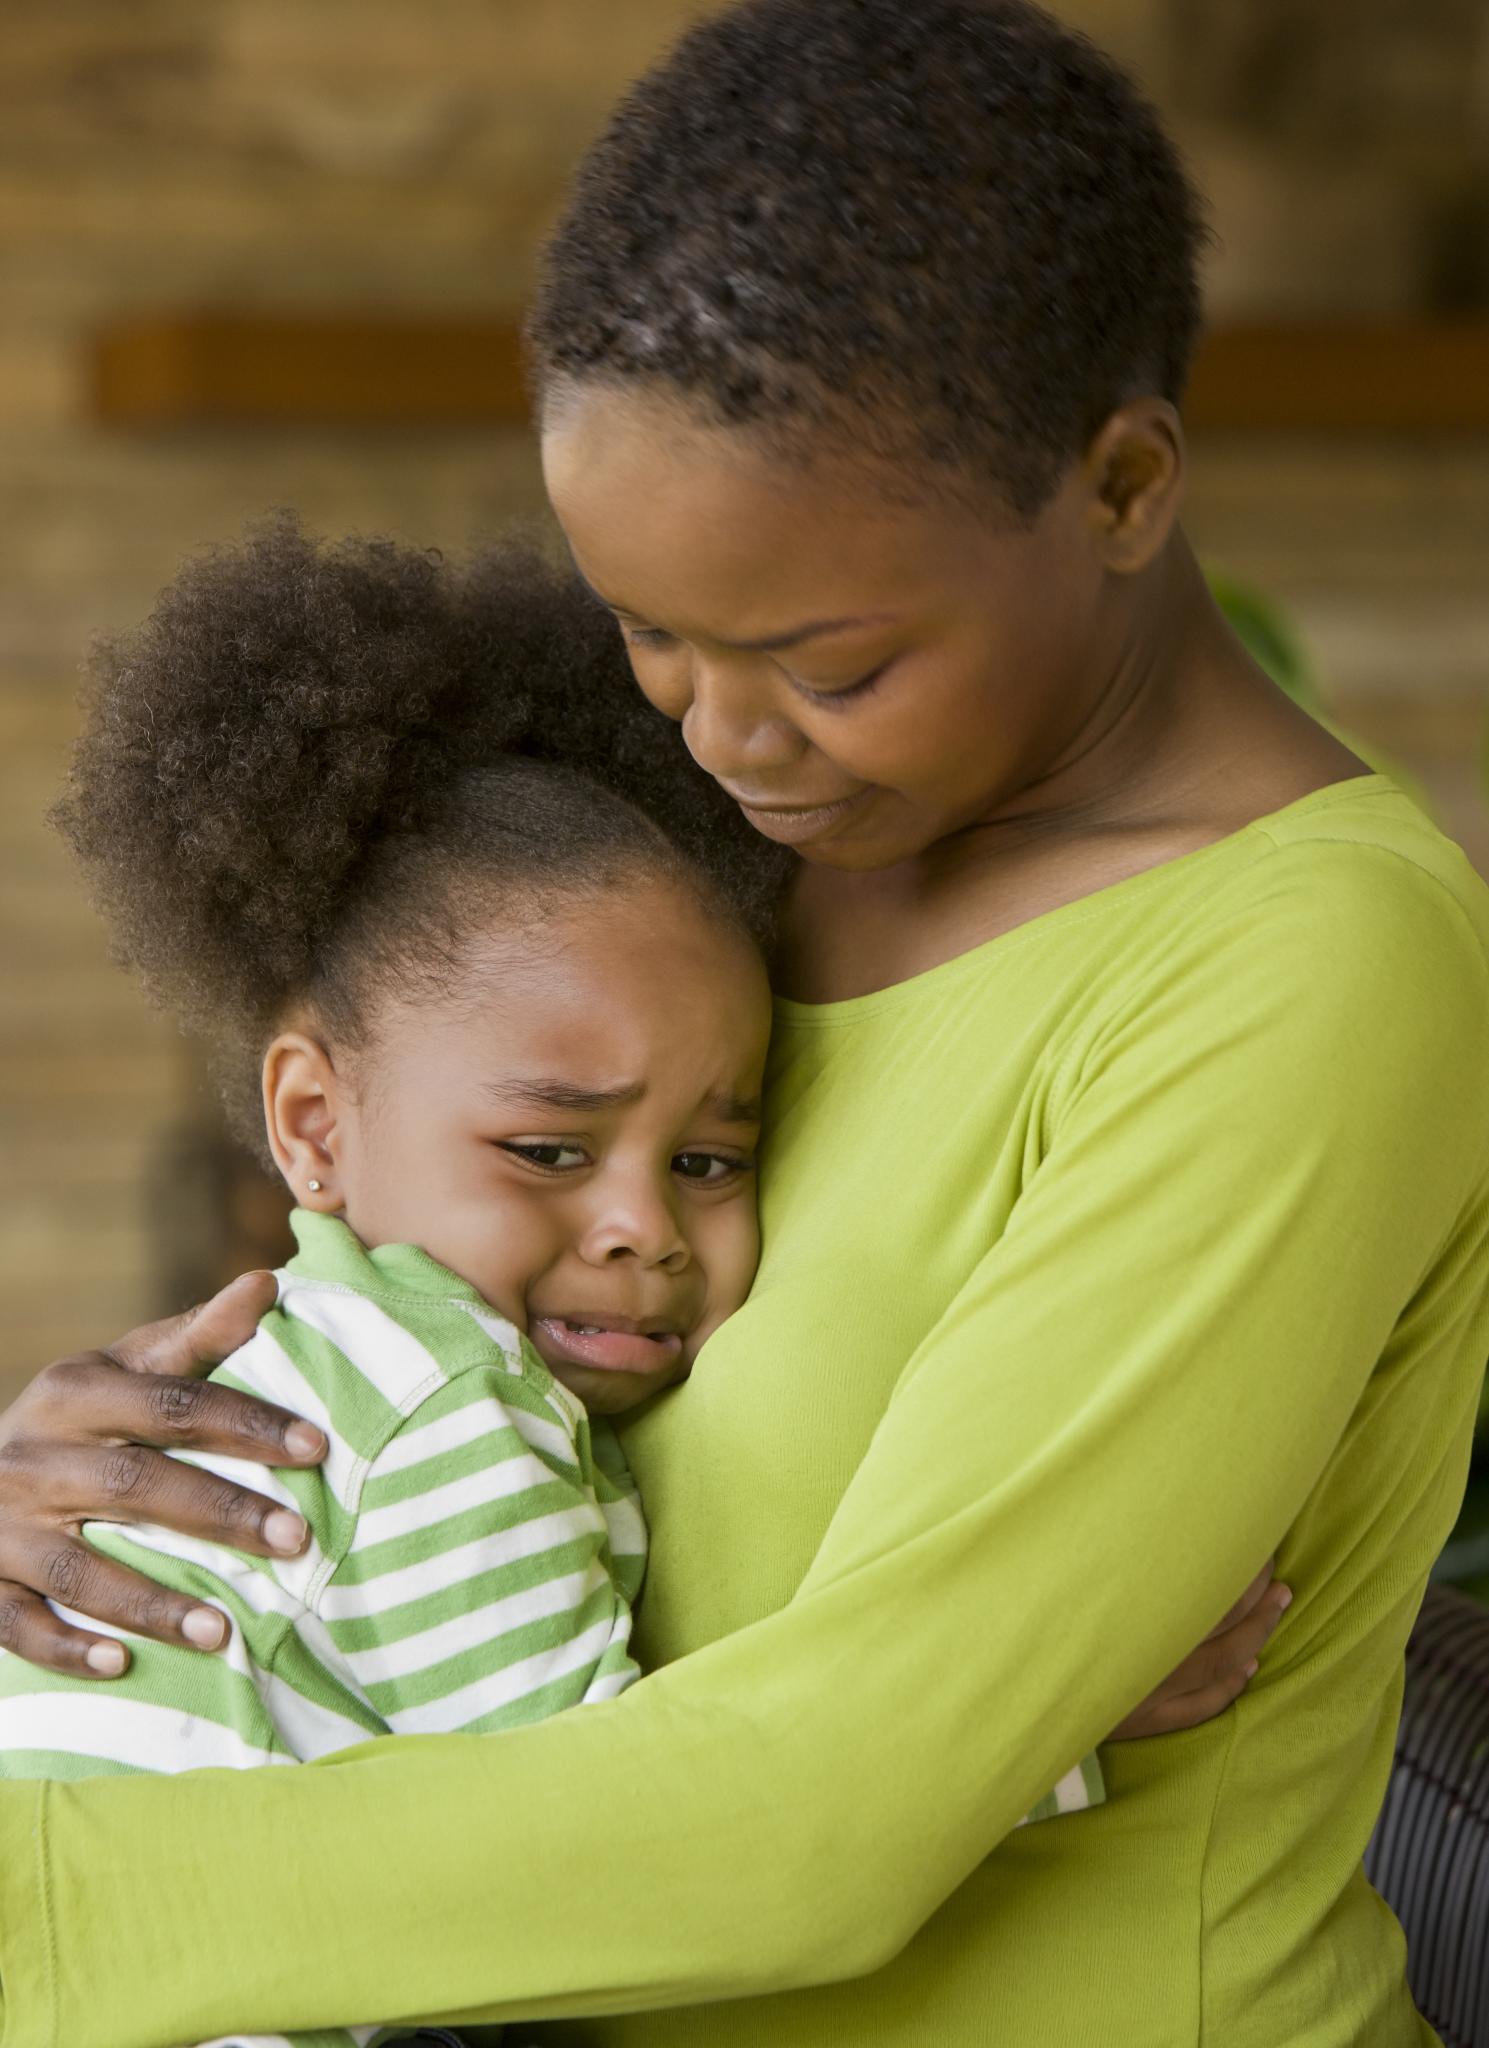 Would You Intervene If You Saw a Mother Struggling With Her Child?